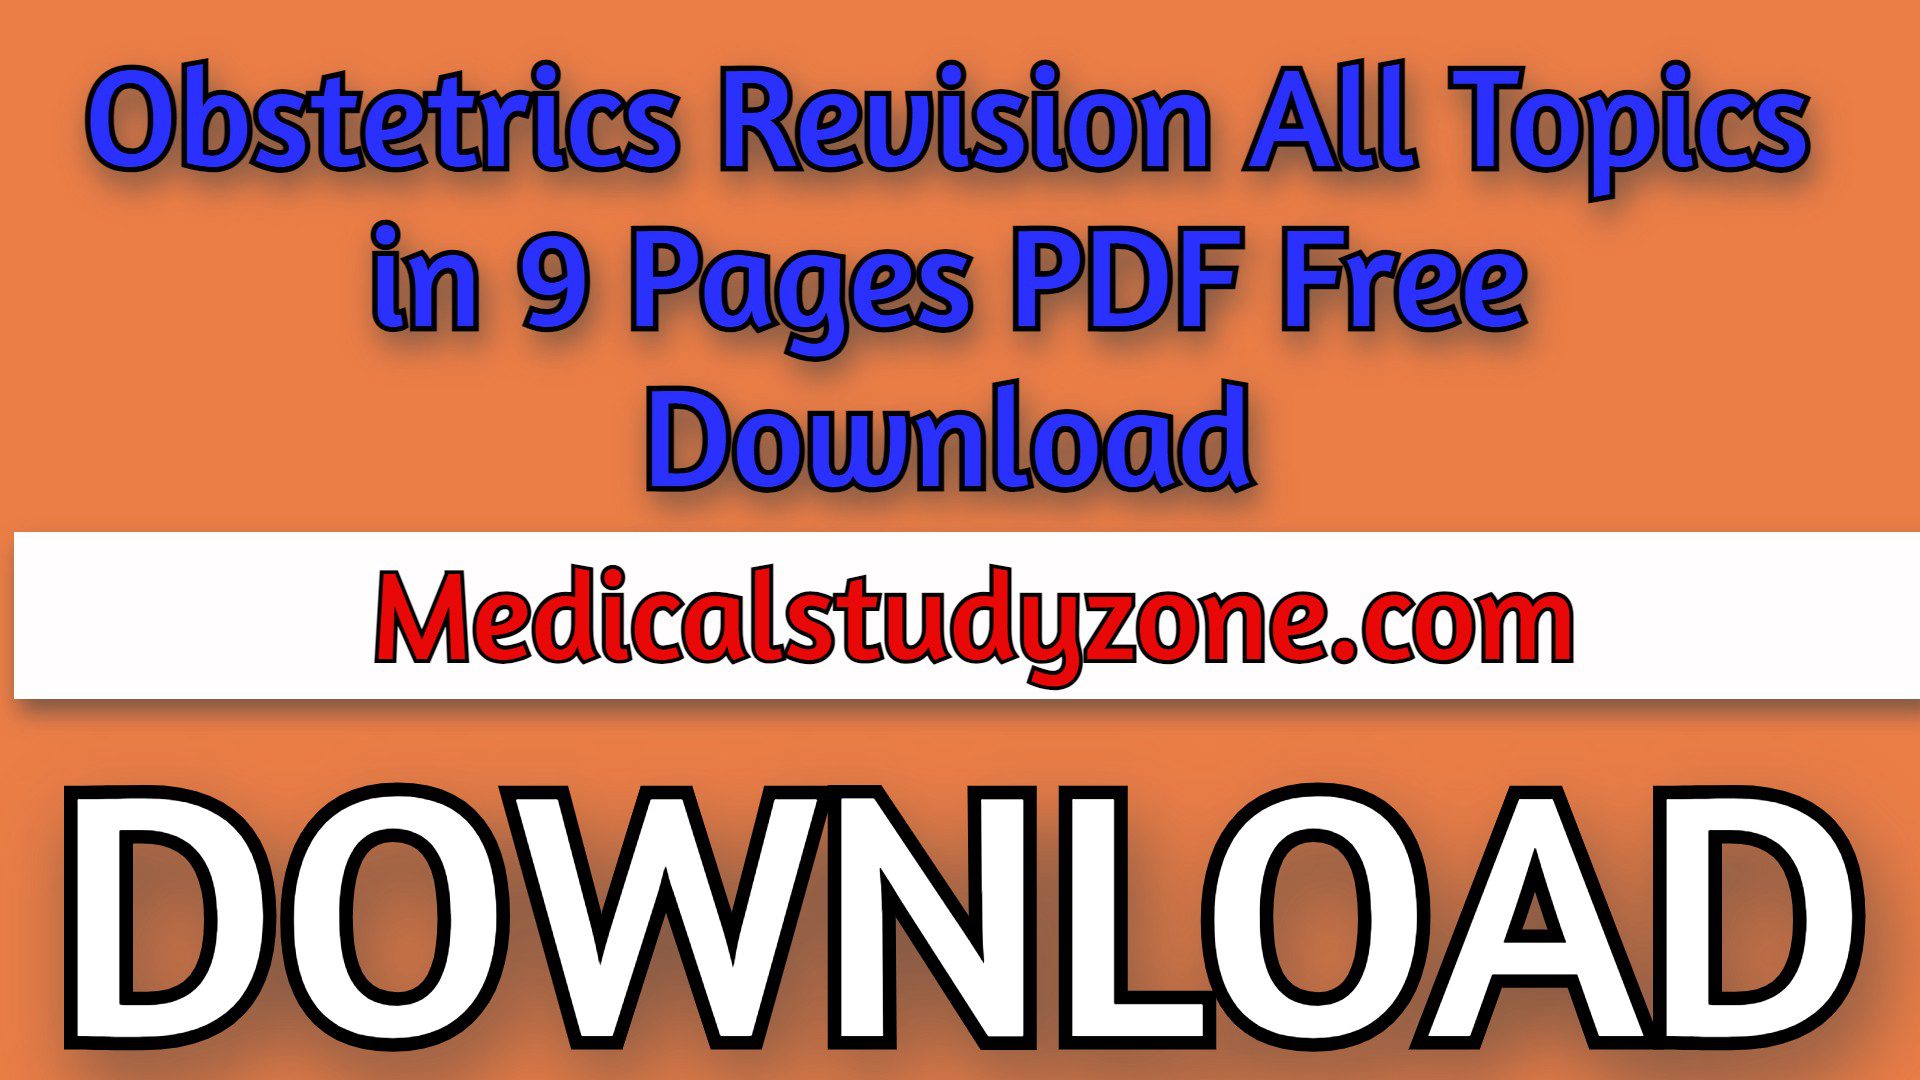 Obstetrics Revision All Topics in 9 Pages PDF Free Download